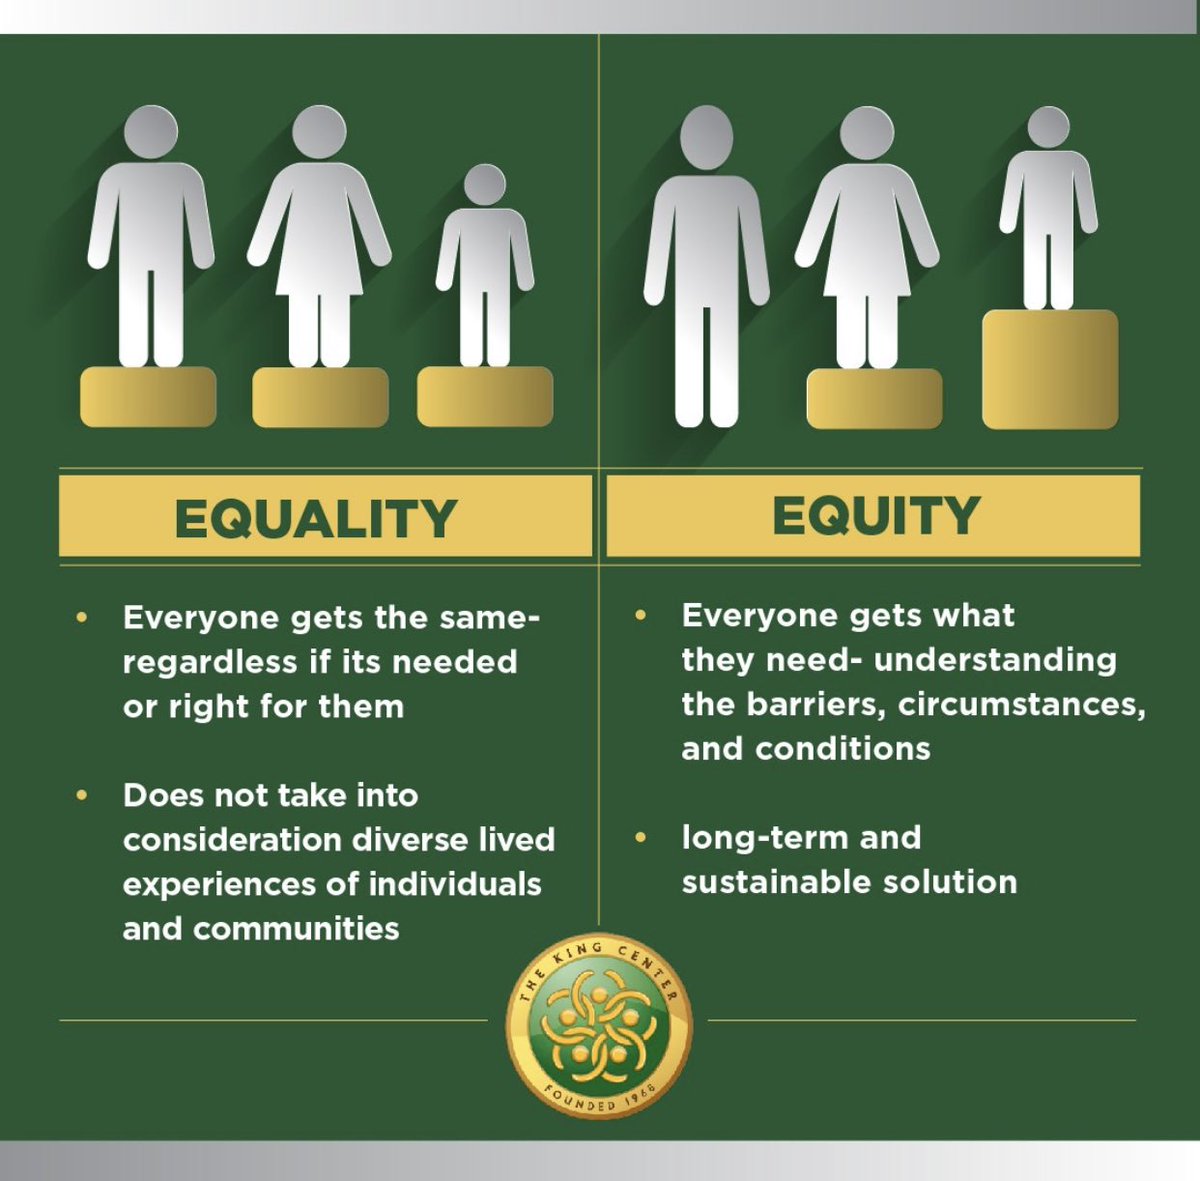 #Equality and #equity are not the same. Equality treats everyone the same; equity ensures access to needed opportunities and resources while understanding barriers and circumstances. Let’s aim for equity to create a more just and inclusive society. #EqualityVsEquity